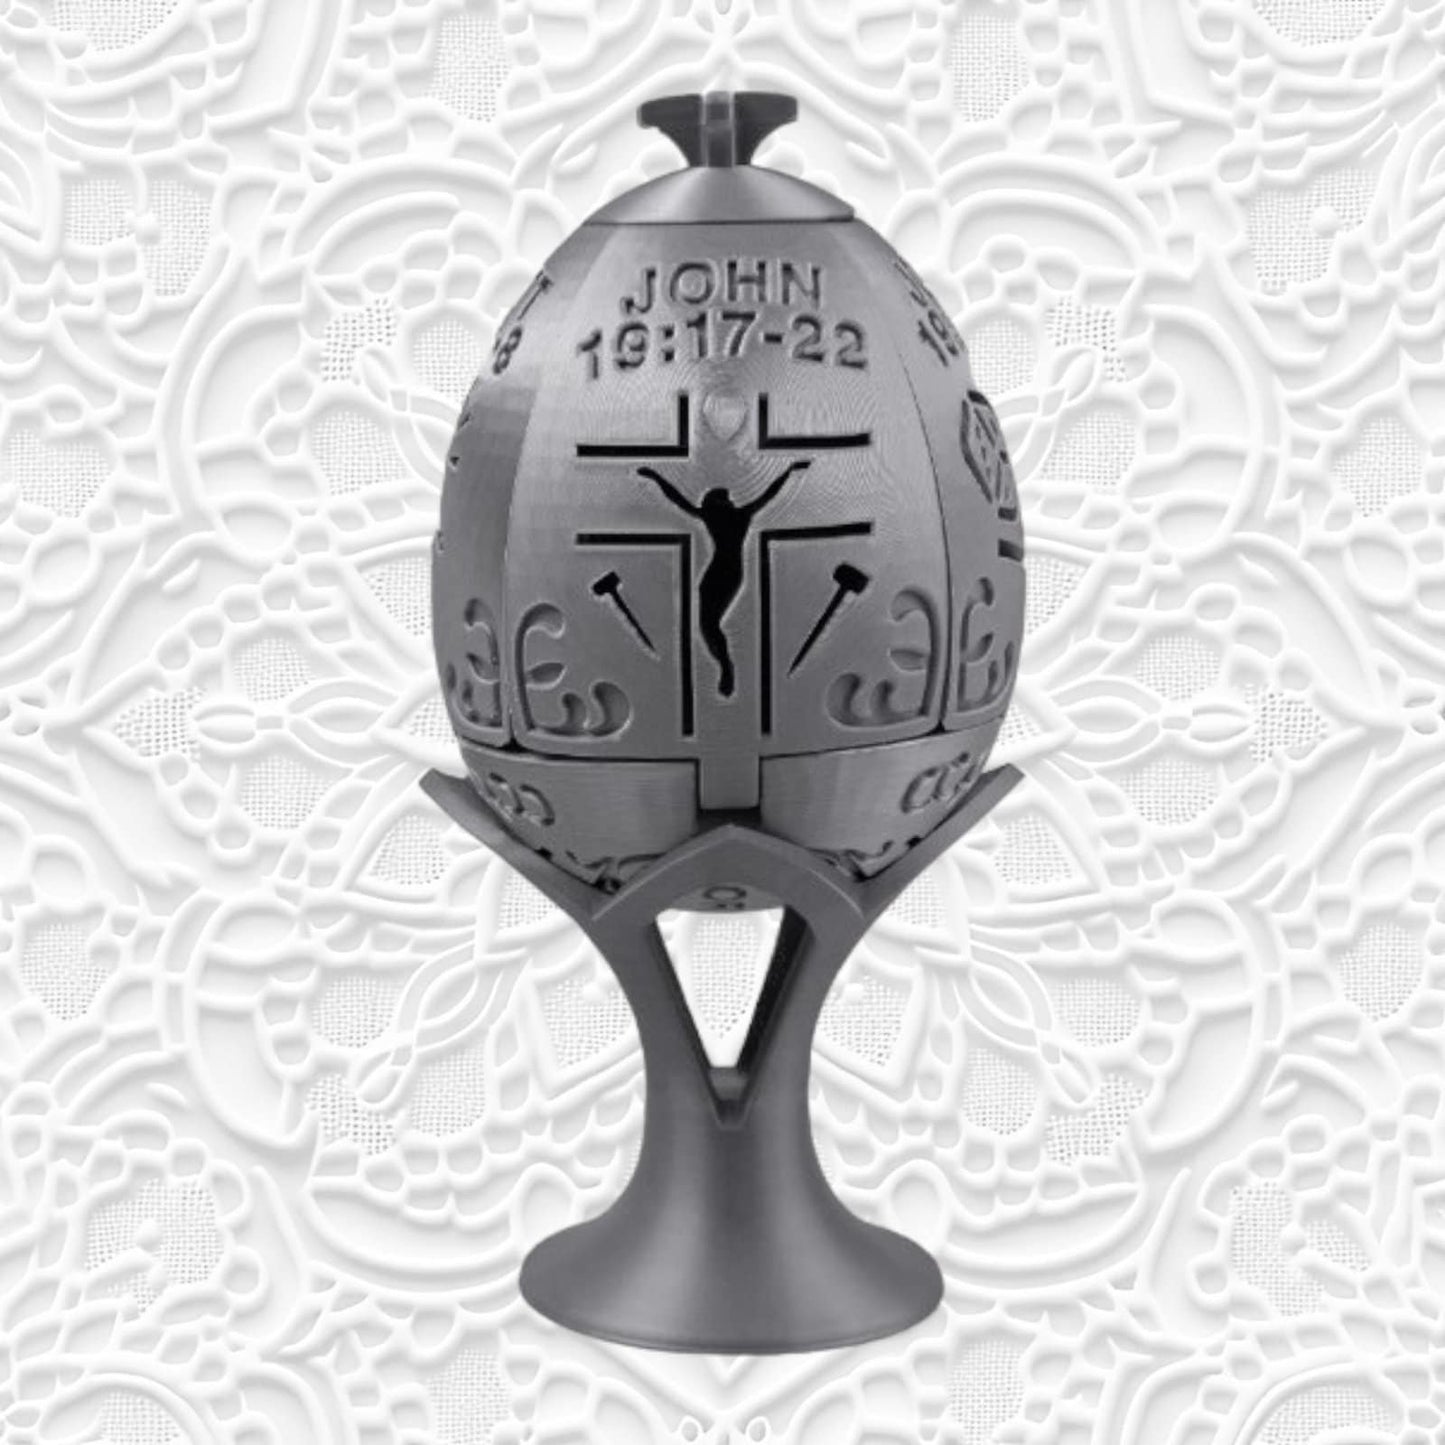 Easter 3D Printed Resurrection Egg - Depicting Jesus's Death & Resurrection with cutouts and Bible verses - 3D Printed Gift